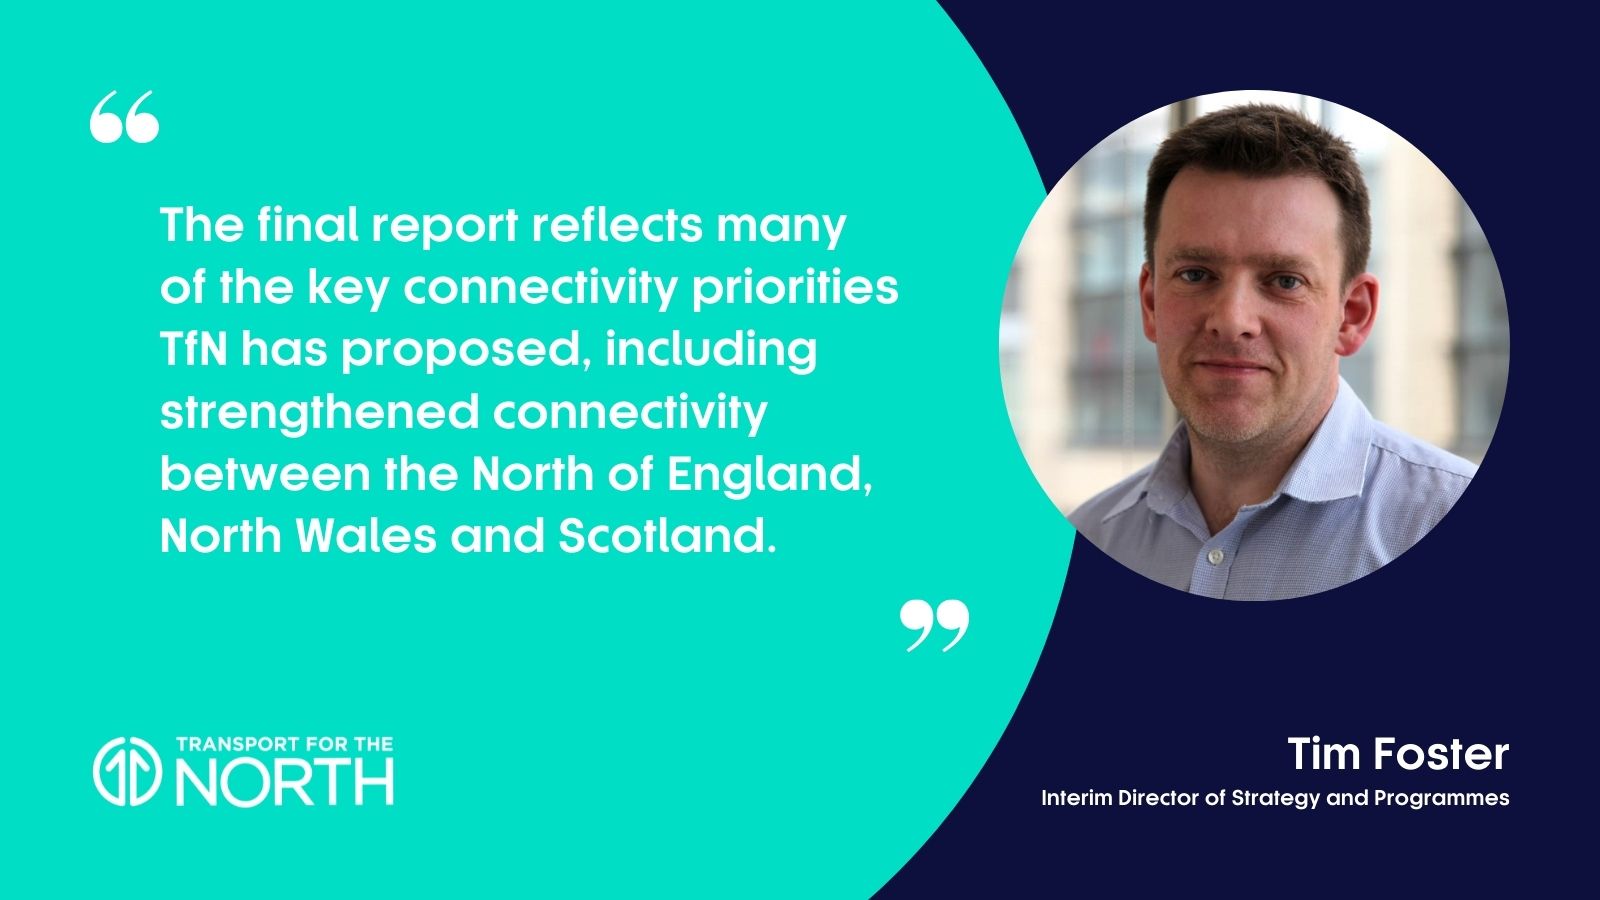 Tim Foster, Transport for the North's Interim Director of Strategy and Programme, on the Union Connectivity Review